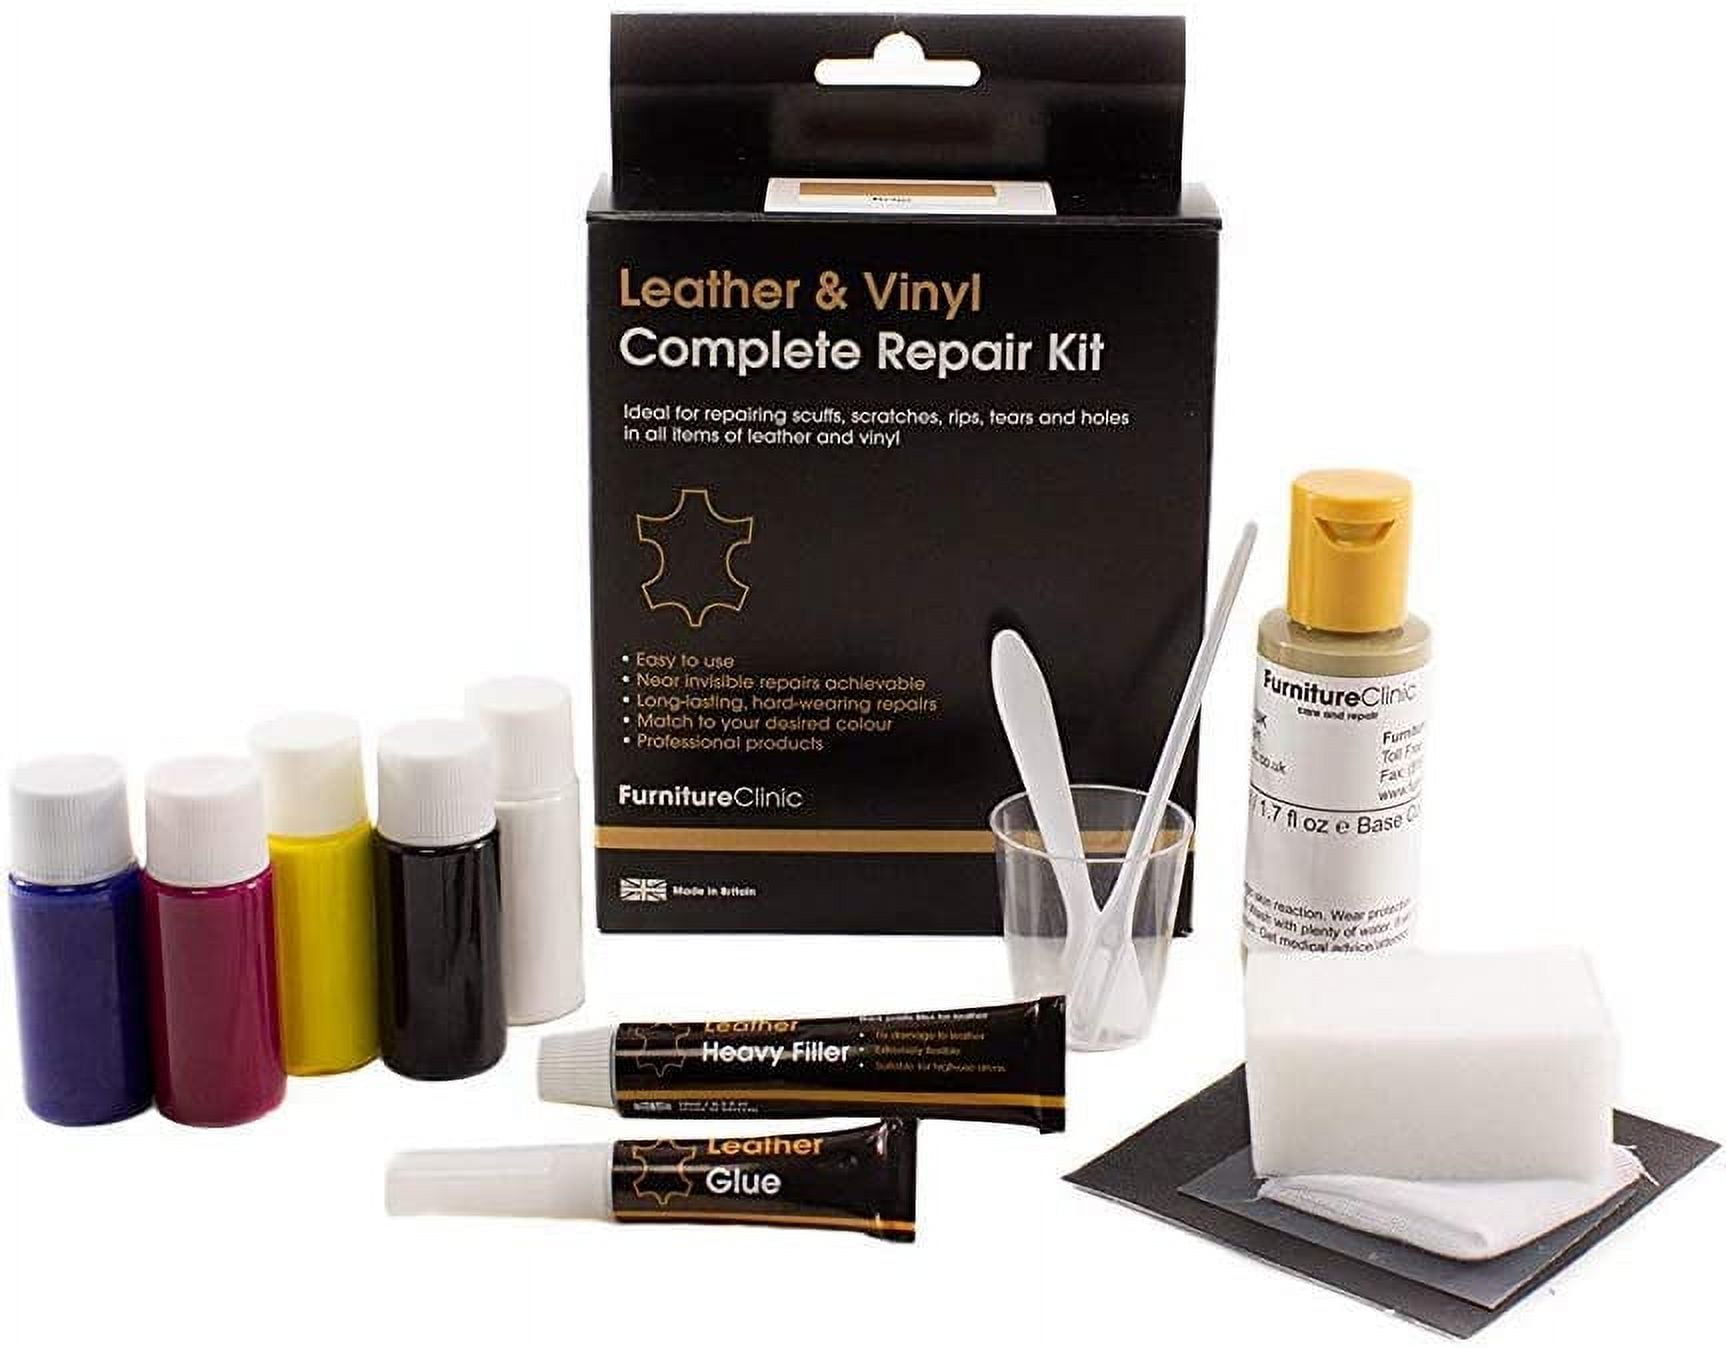 Furniture Clinic Leather & Vinyl Complete Repair Kit | Leather Repair Kit  for Couches, Car Seats & Furniture | Quickly Repair Rips, Holes, Tears 